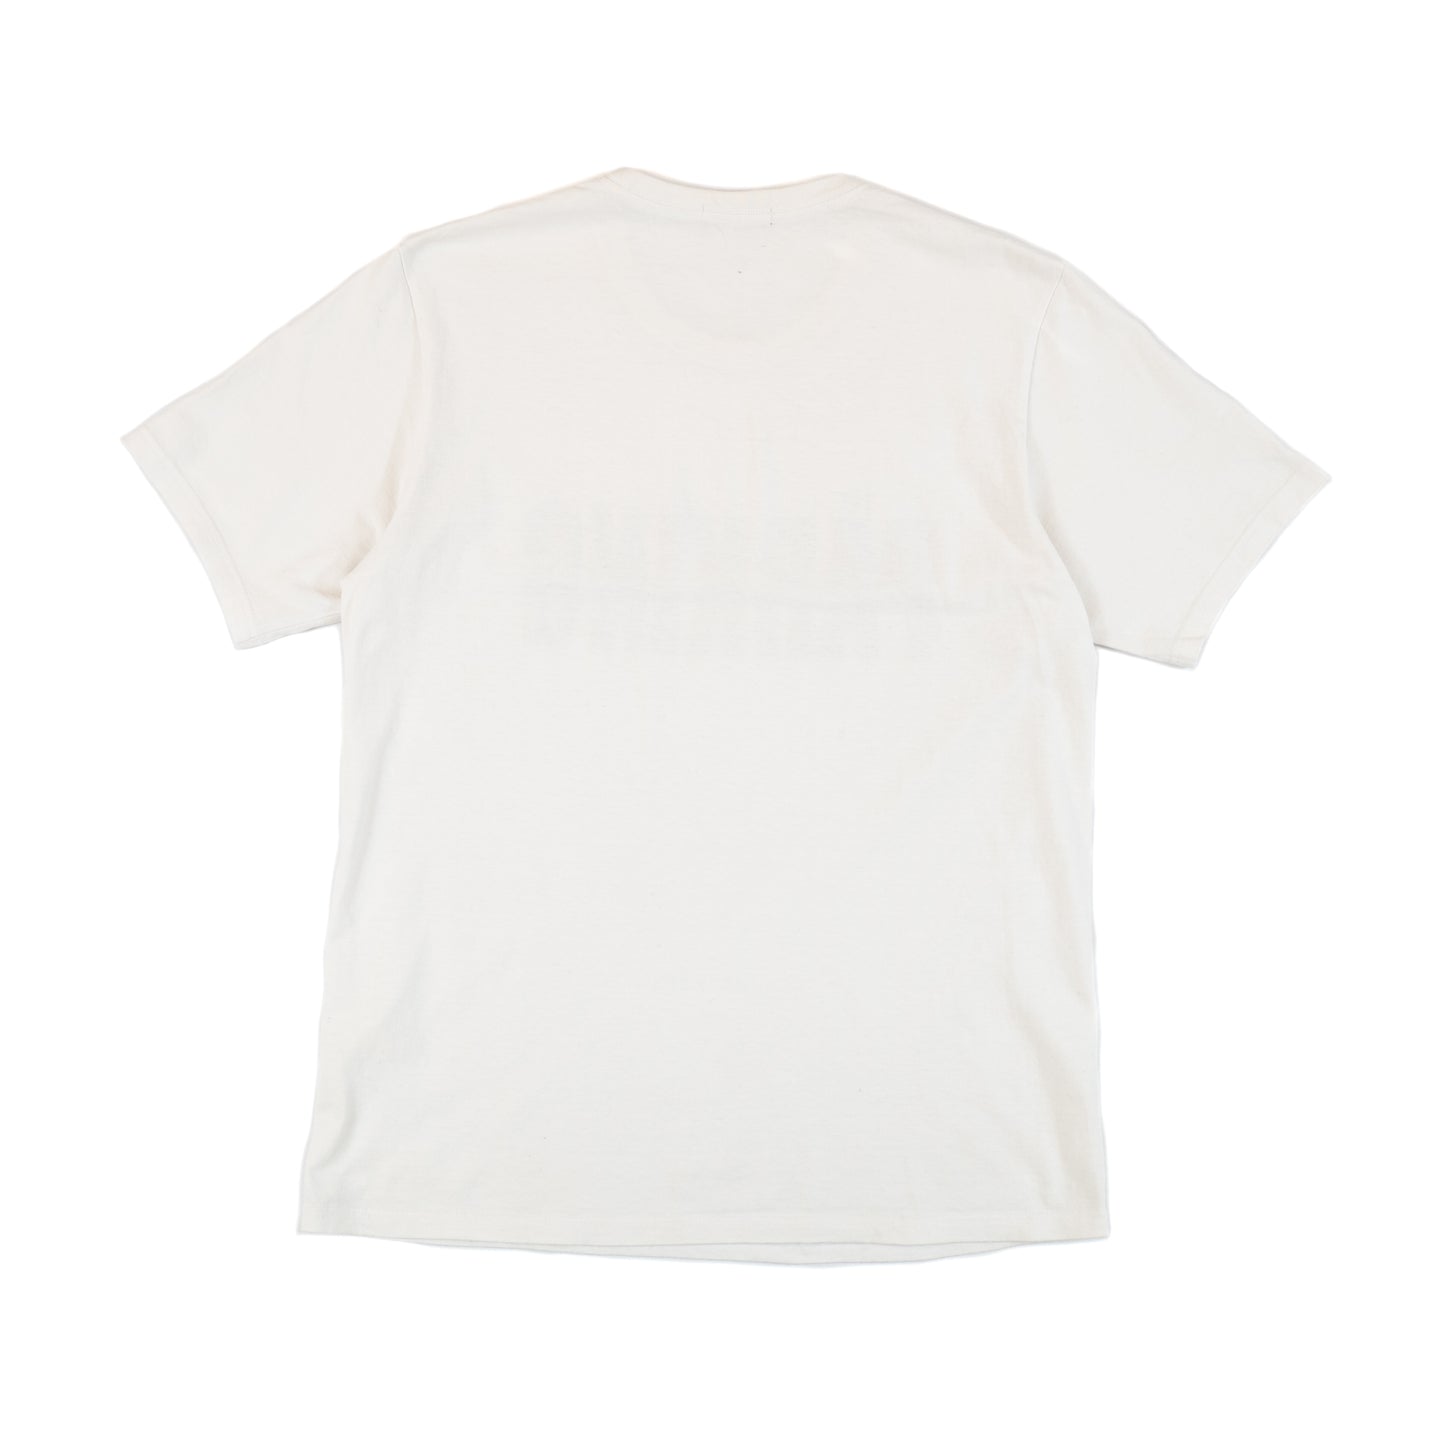 Undercover x the PARKING Ginza T-Shirt